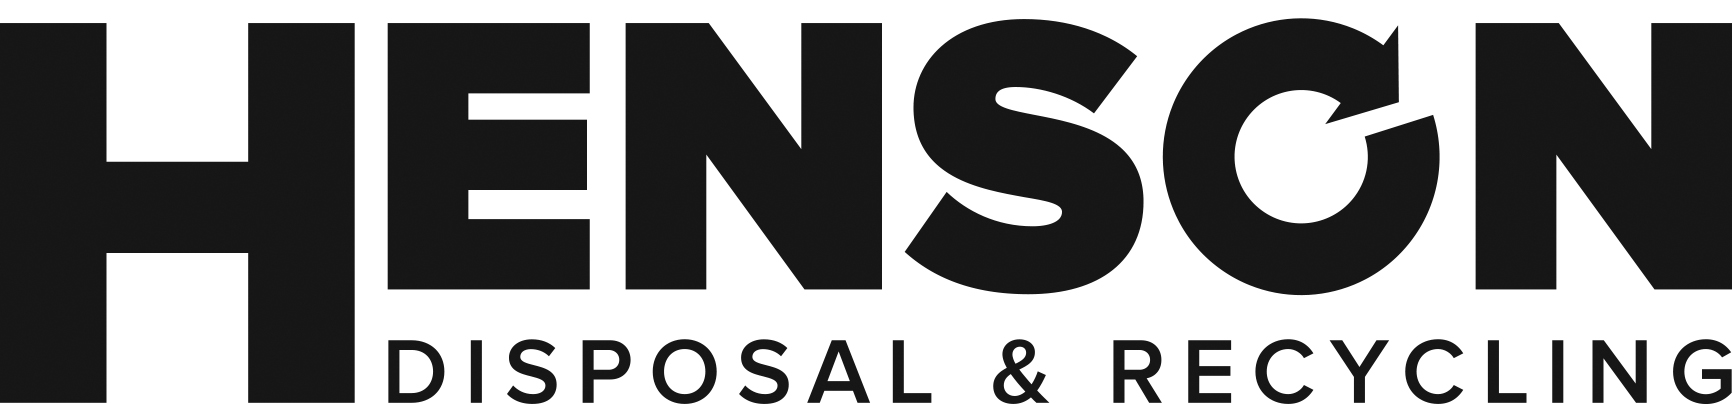 Henson Disposal and Recycling Logo